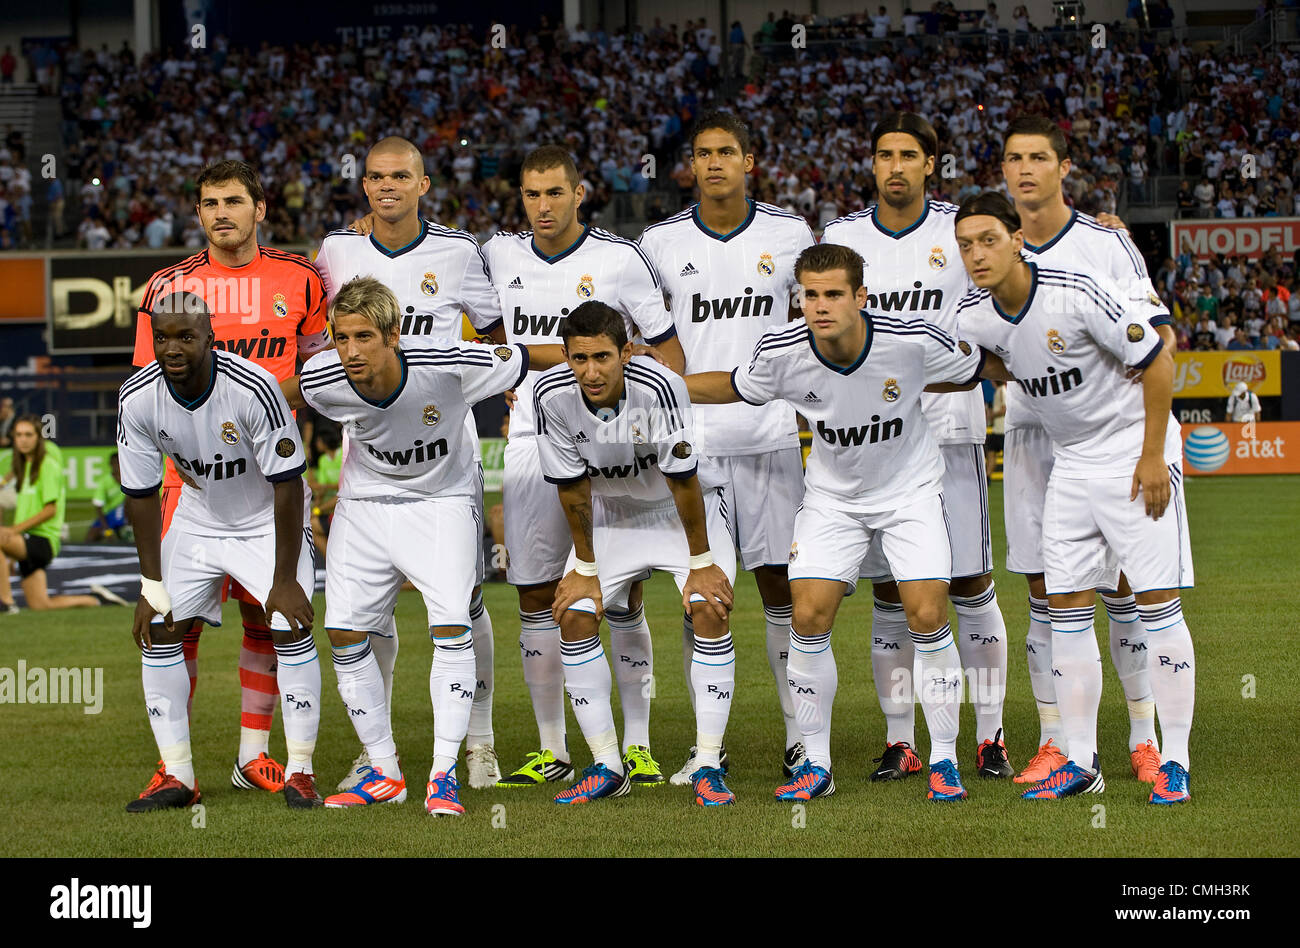 8th Aug 2012. 08.08.2012. New York, USA.  World Football Challenge - Real Madrid v AC Milan -  Cristiano Ronaldo and Real Madrid play A.C. Milan at Yankee Stadium. Real Madrid team photo.  ***** ALL NEW YORK NEWSPAPERS OUT ---- ALL NEW YORK NEWSPAPERS OUT ***** Stock Photo